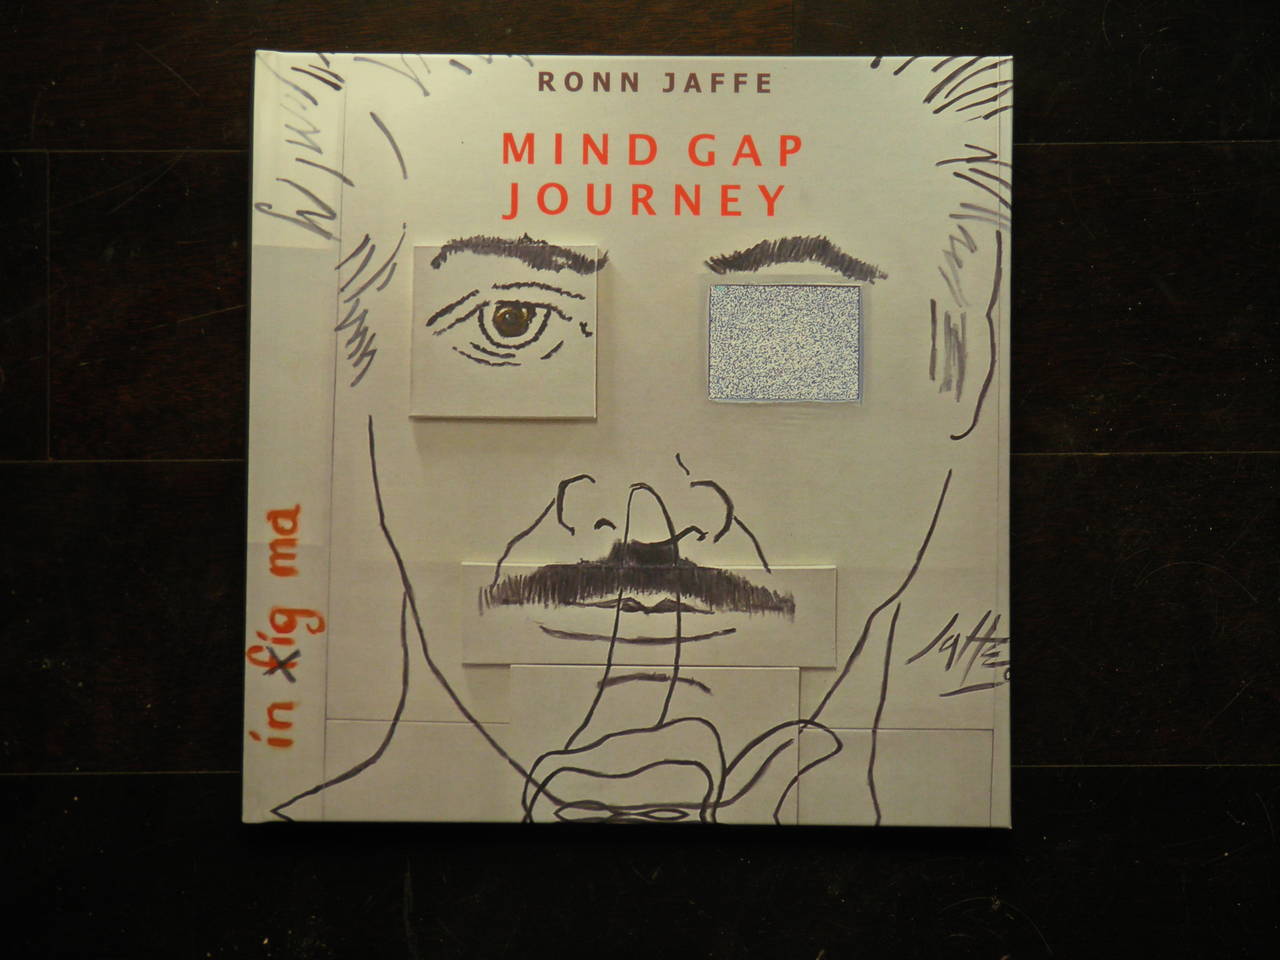 Get a copy of the monograph of noted artist Ronn Jaffe- 'MIND GAP JOURNEY 21C.'-- 89 Pages of RJ cutting contemporary conceptual art and design photos including RJ's Poetry--soft cover- limited availability. written by Dr. Wyatt Jaffe
Noted artist